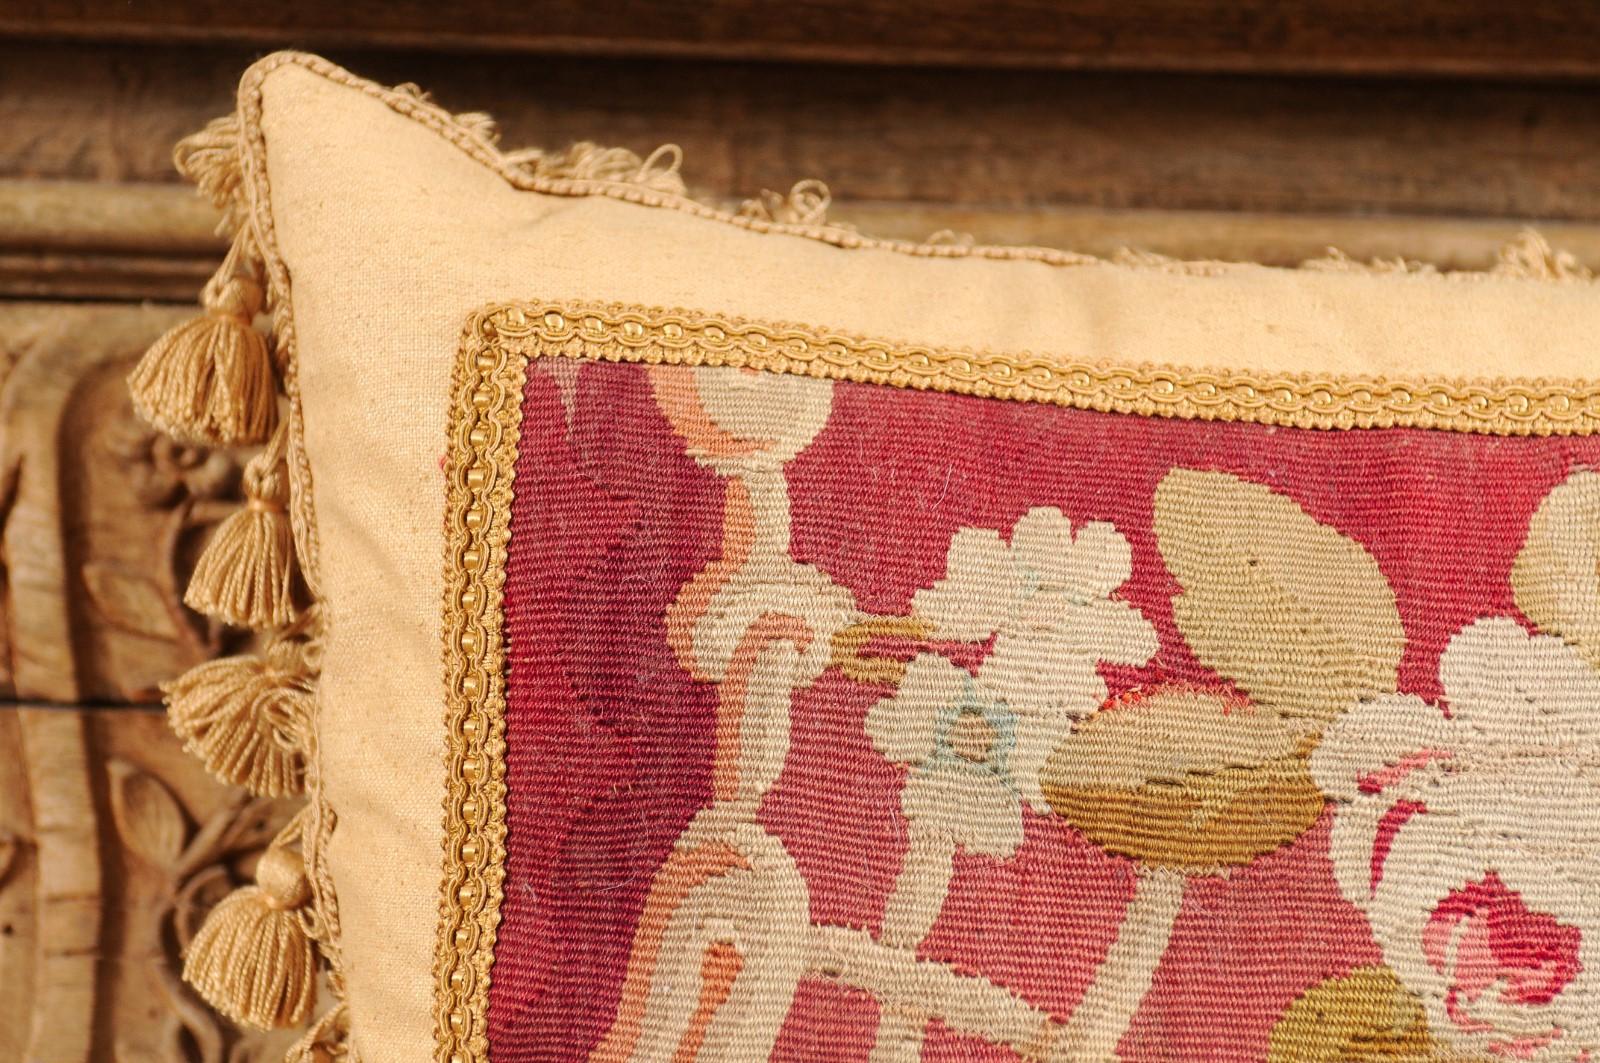 French 19th Century Aubusson Tapestry Pillow with Floral Decor and Tassels For Sale 11